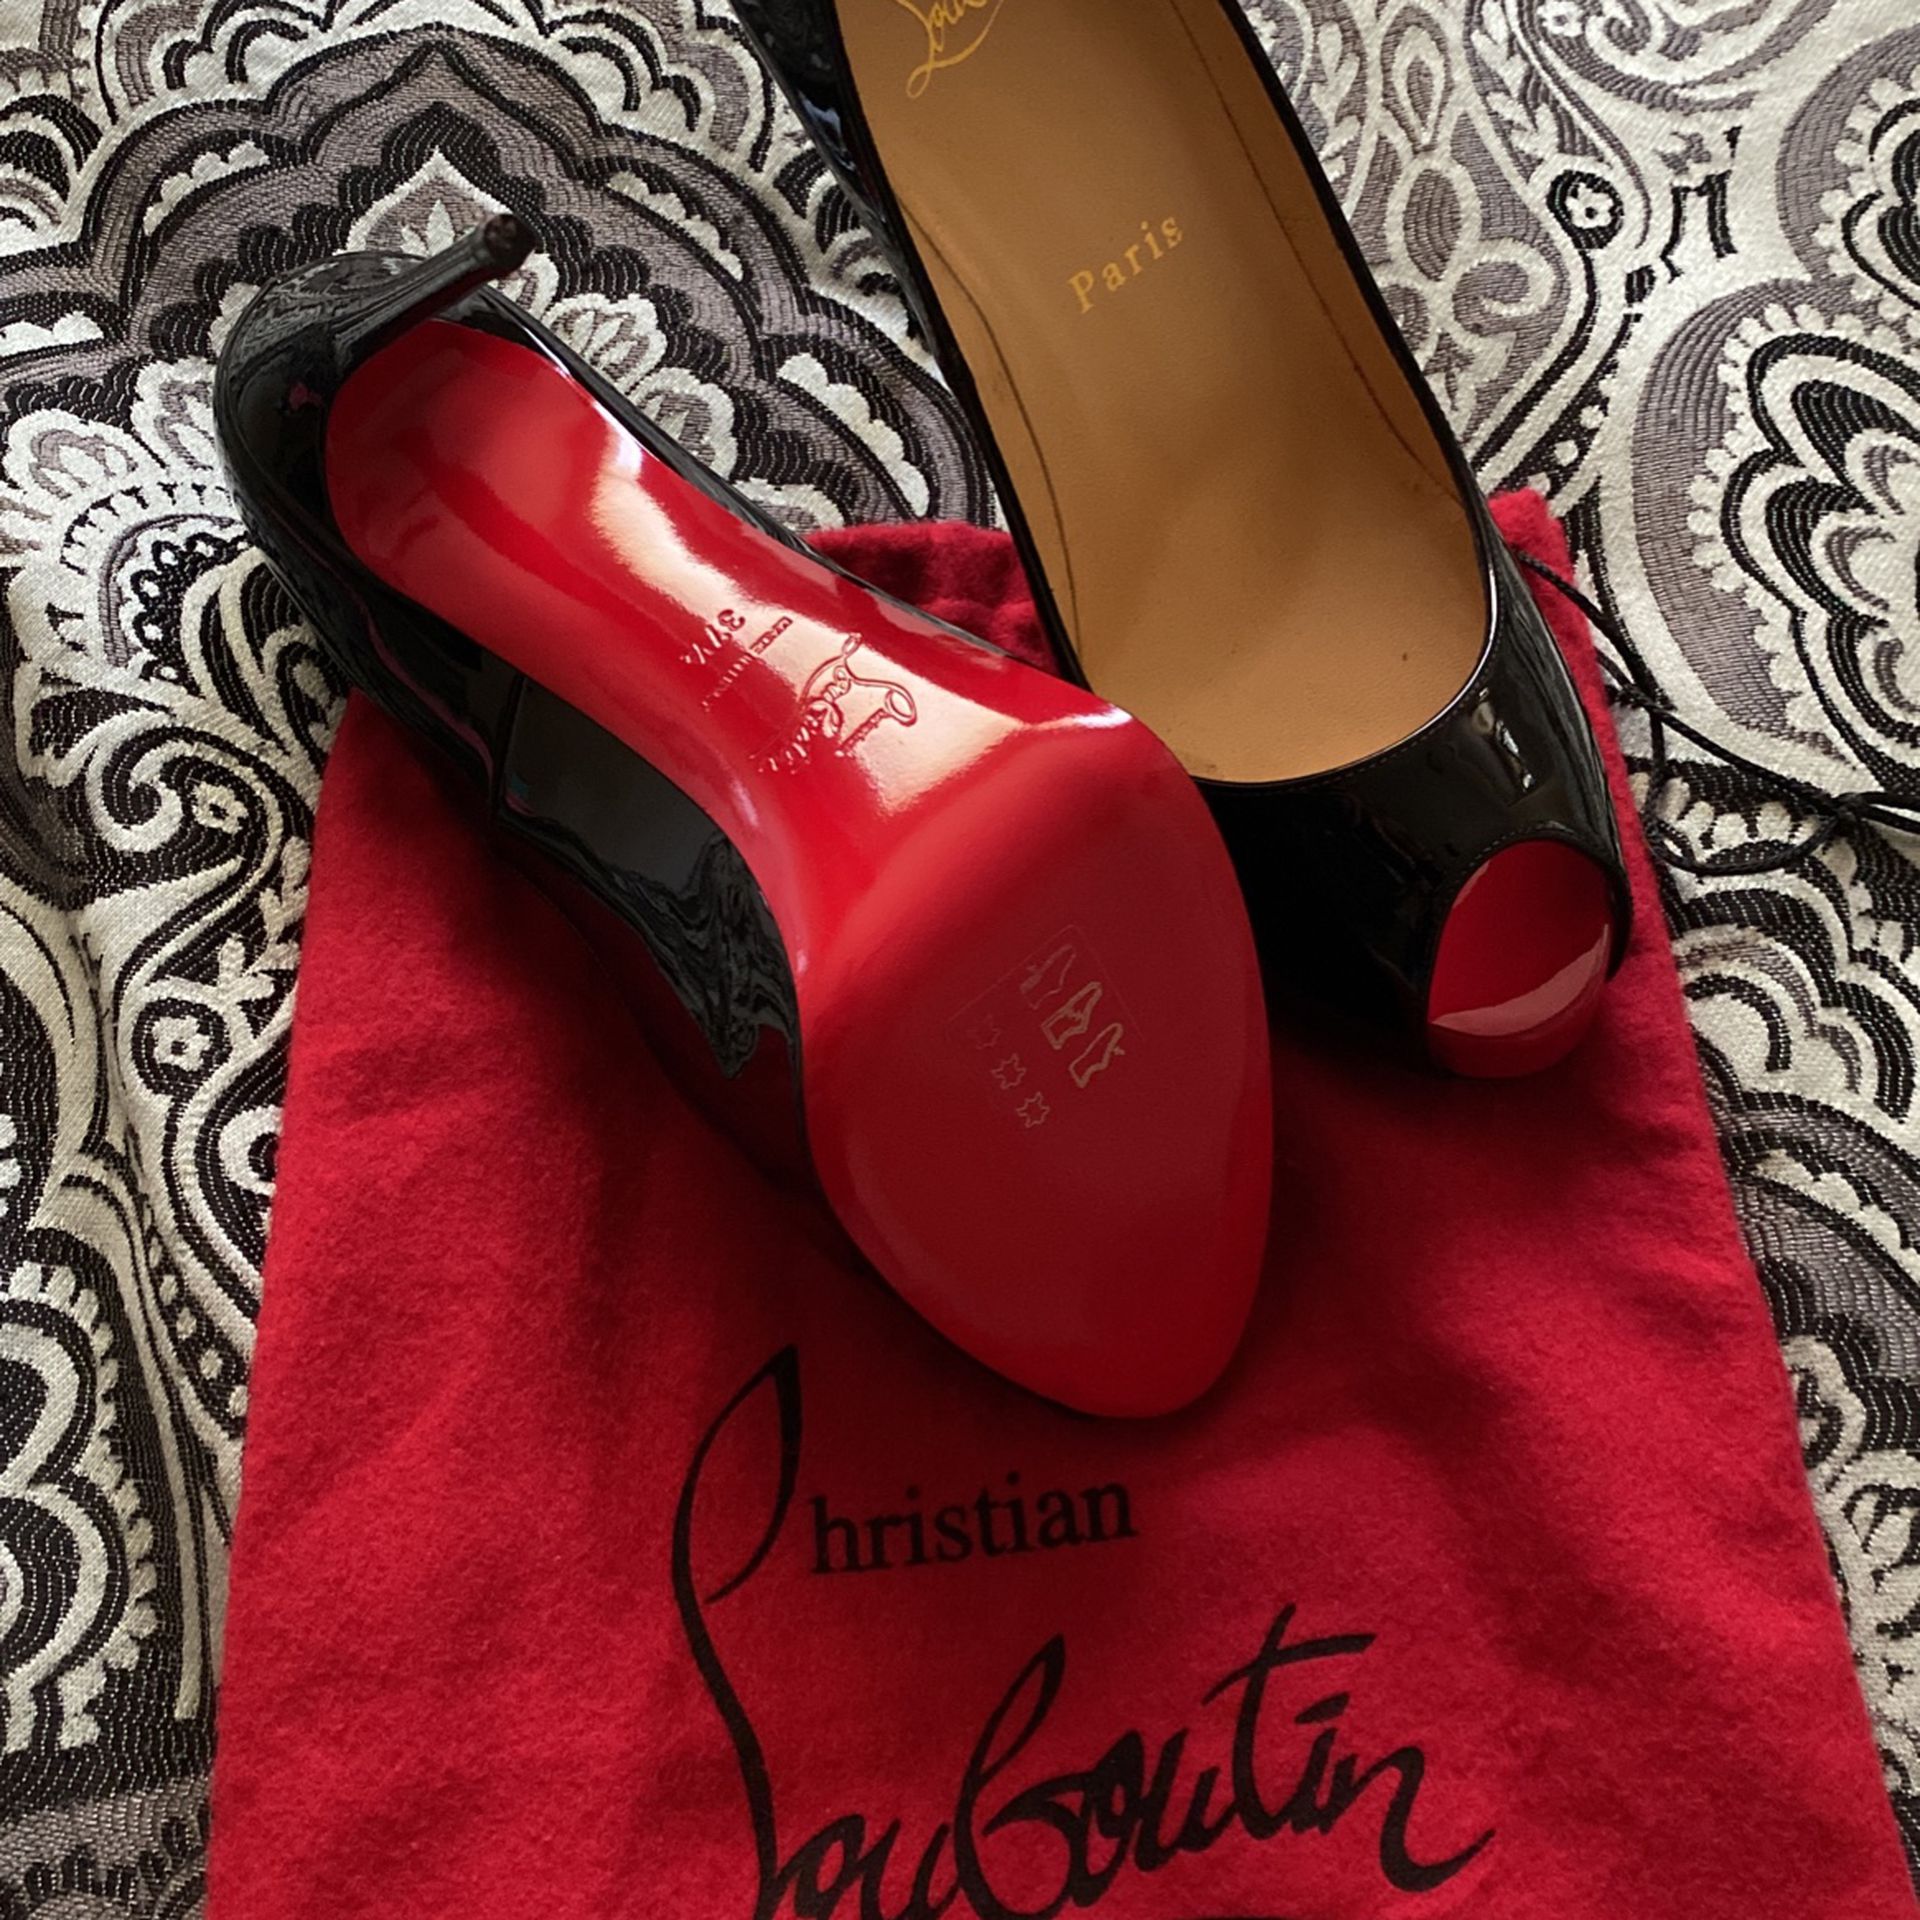 Christian Louboutin Heels /Red Bottoms *BRAND NEW*